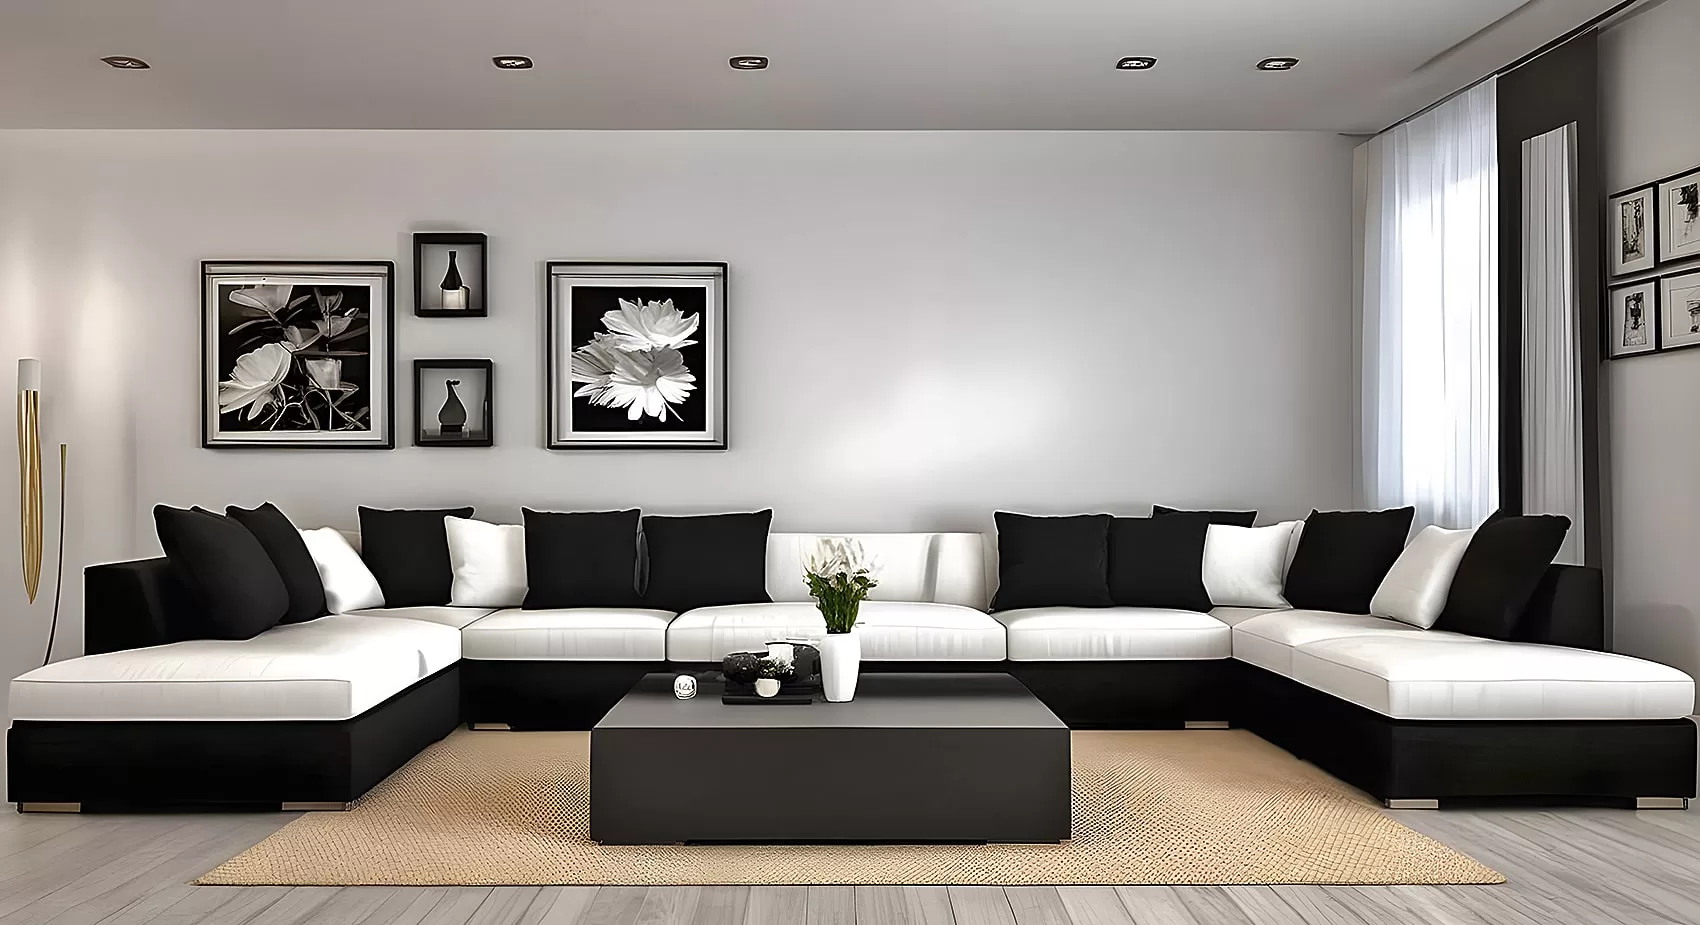 White and Black Couch | White and Black Sofa | Black and White Sofa | Black and White Couch